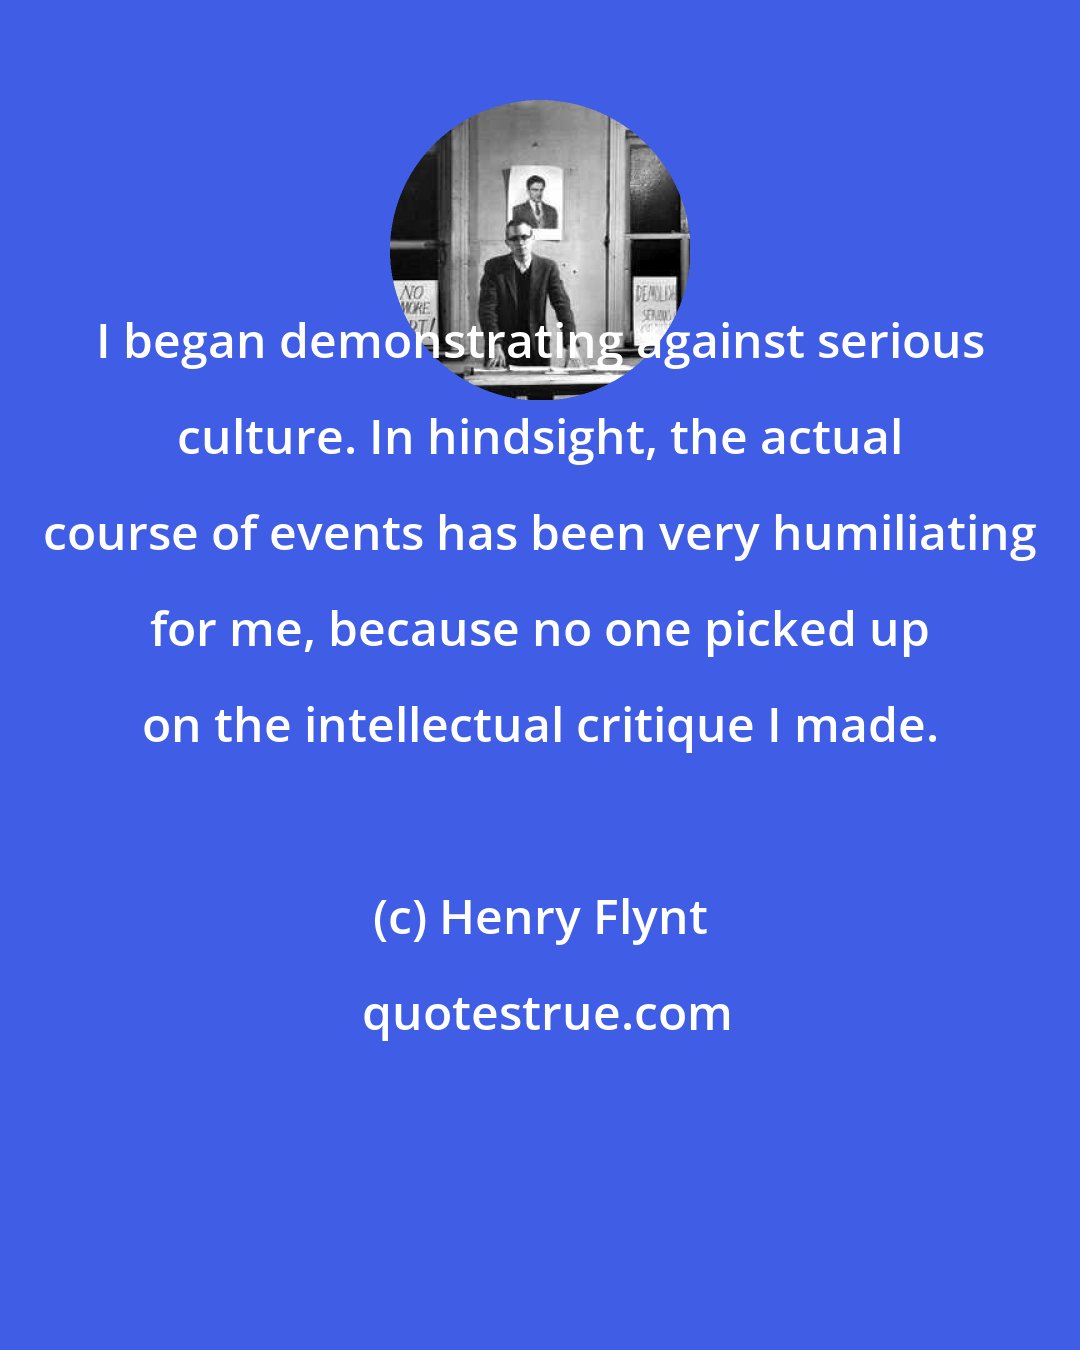 Henry Flynt: I began demonstrating against serious culture. In hindsight, the actual course of events has been very humiliating for me, because no one picked up on the intellectual critique I made.